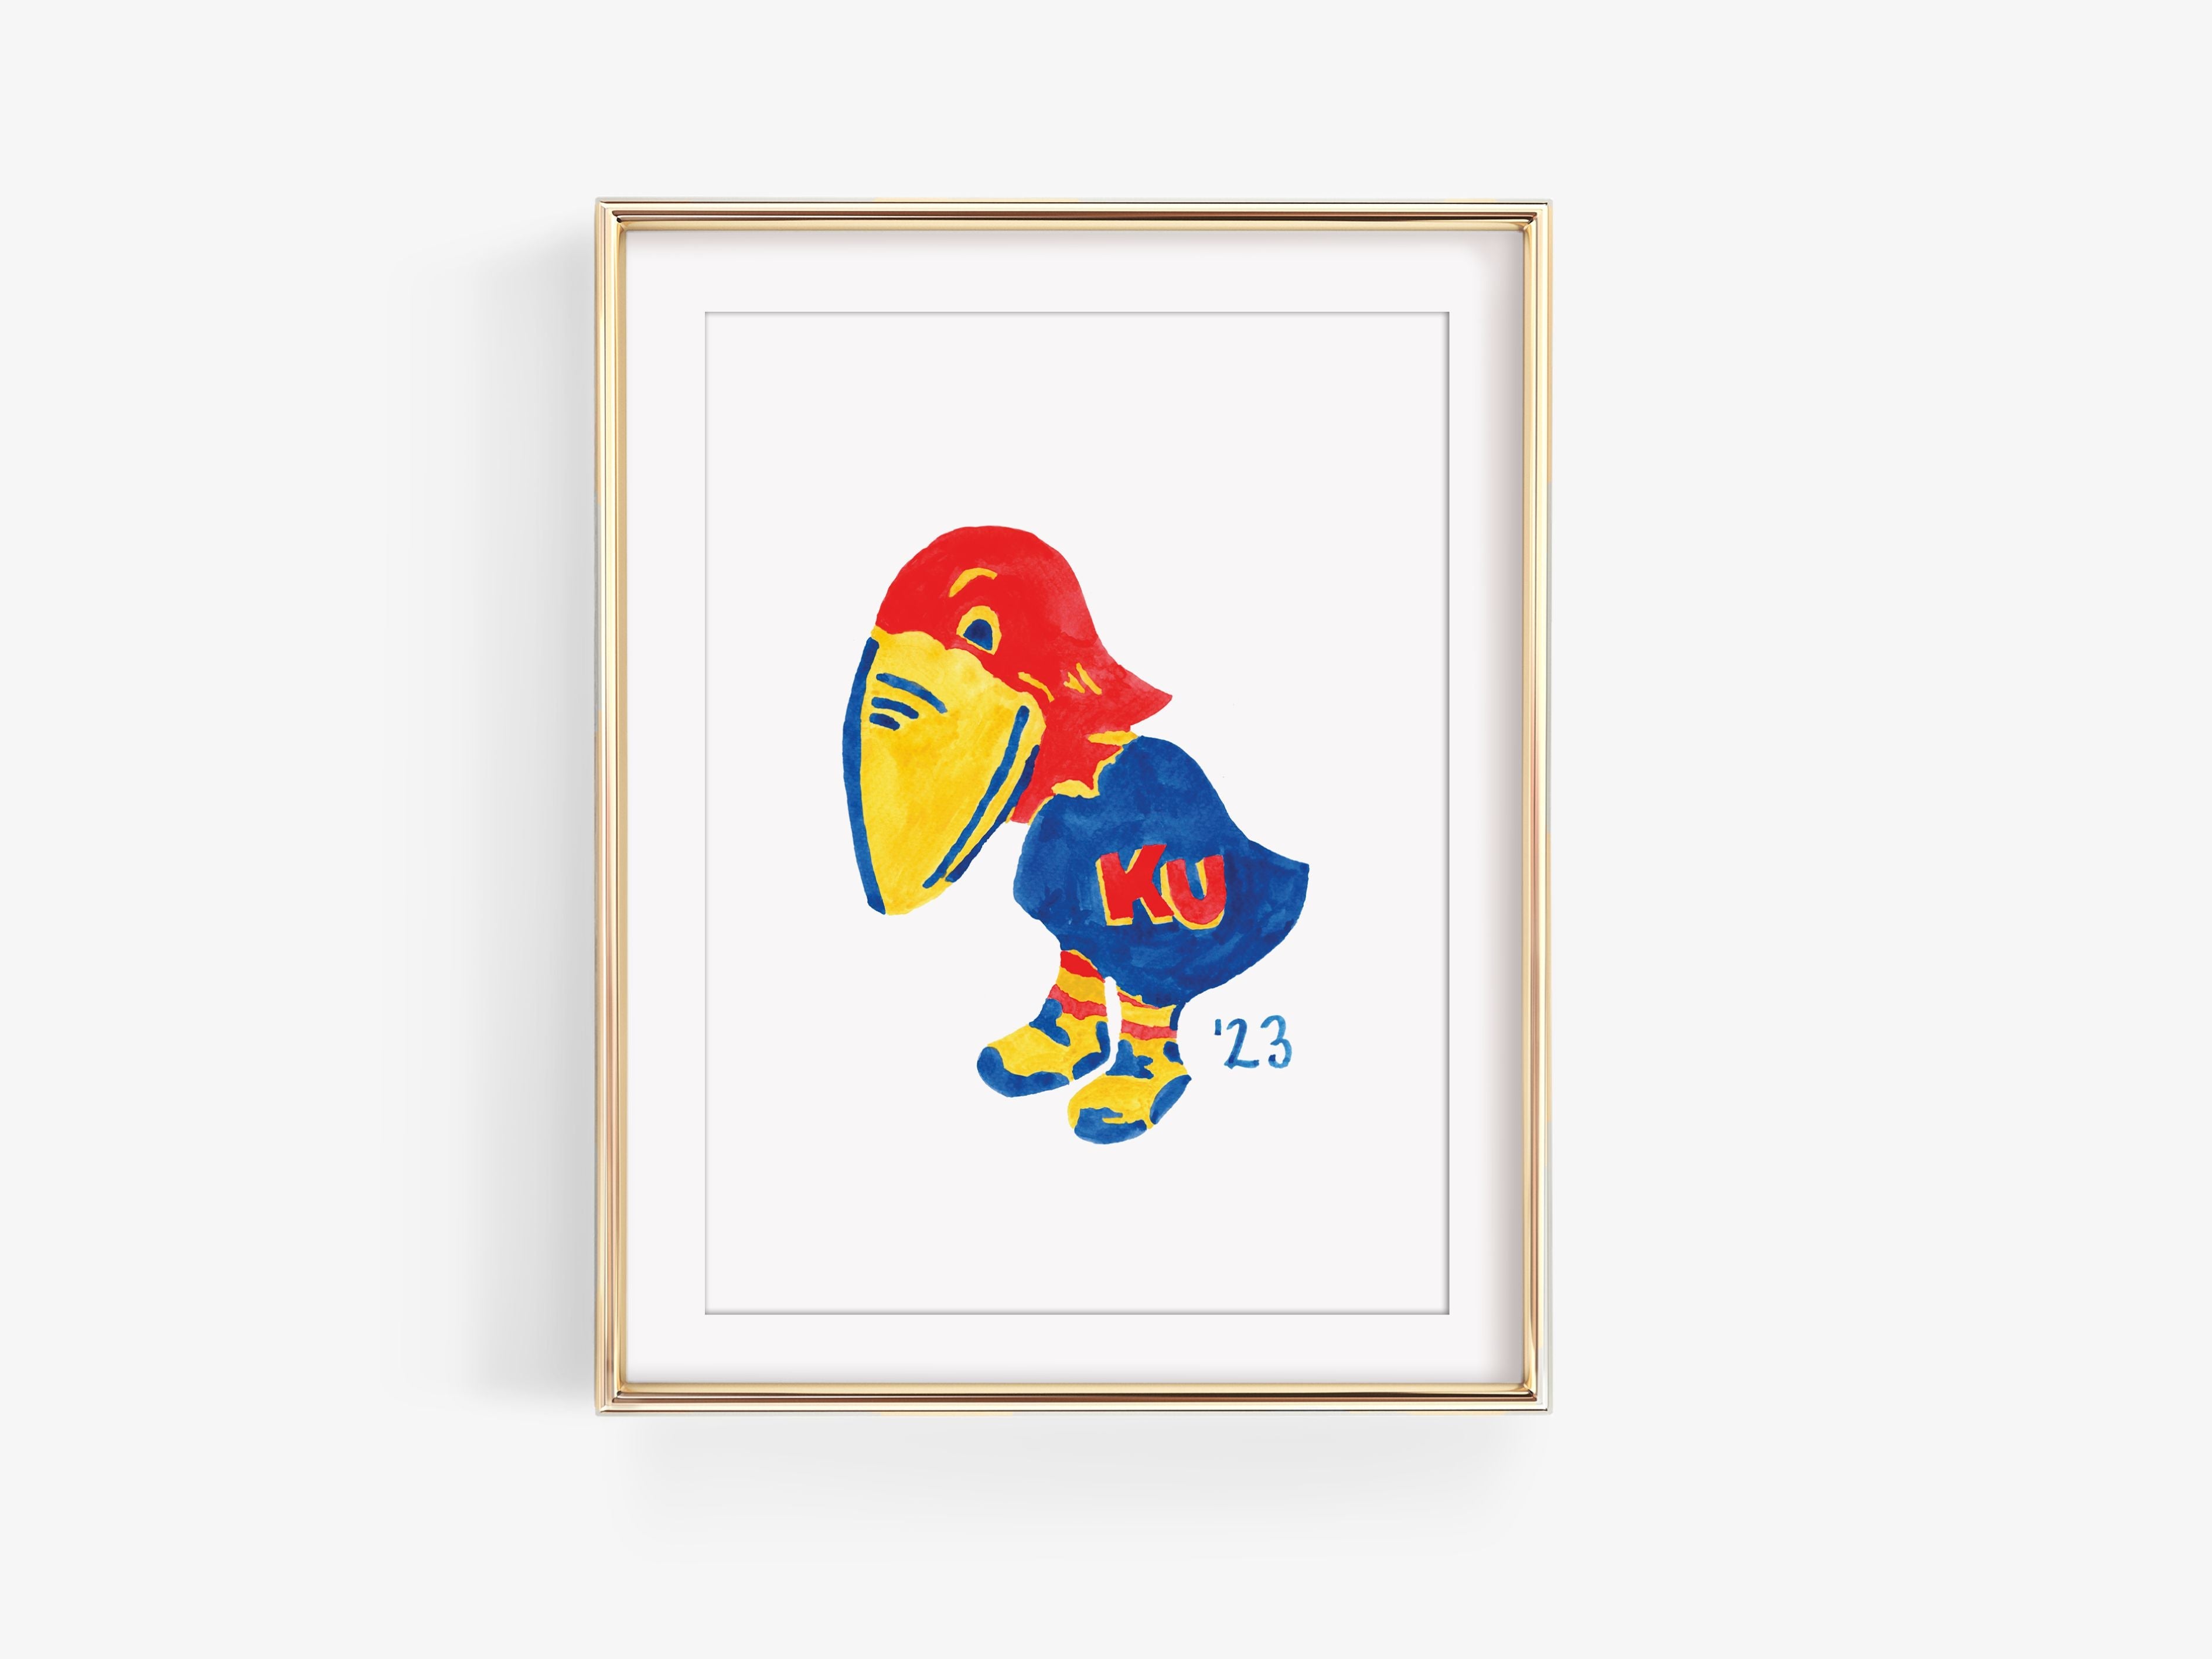 1923 Kansas Jayhawk Art Print [Officially Licensed Product]-This watercolor art print features our hand-painted 1923 Kansas Jayhawk, printed in the USA on 120lb high quality art paper. This makes a great gift or wall decor for the University of Kansas lover in your life.-The Singing Little Bird